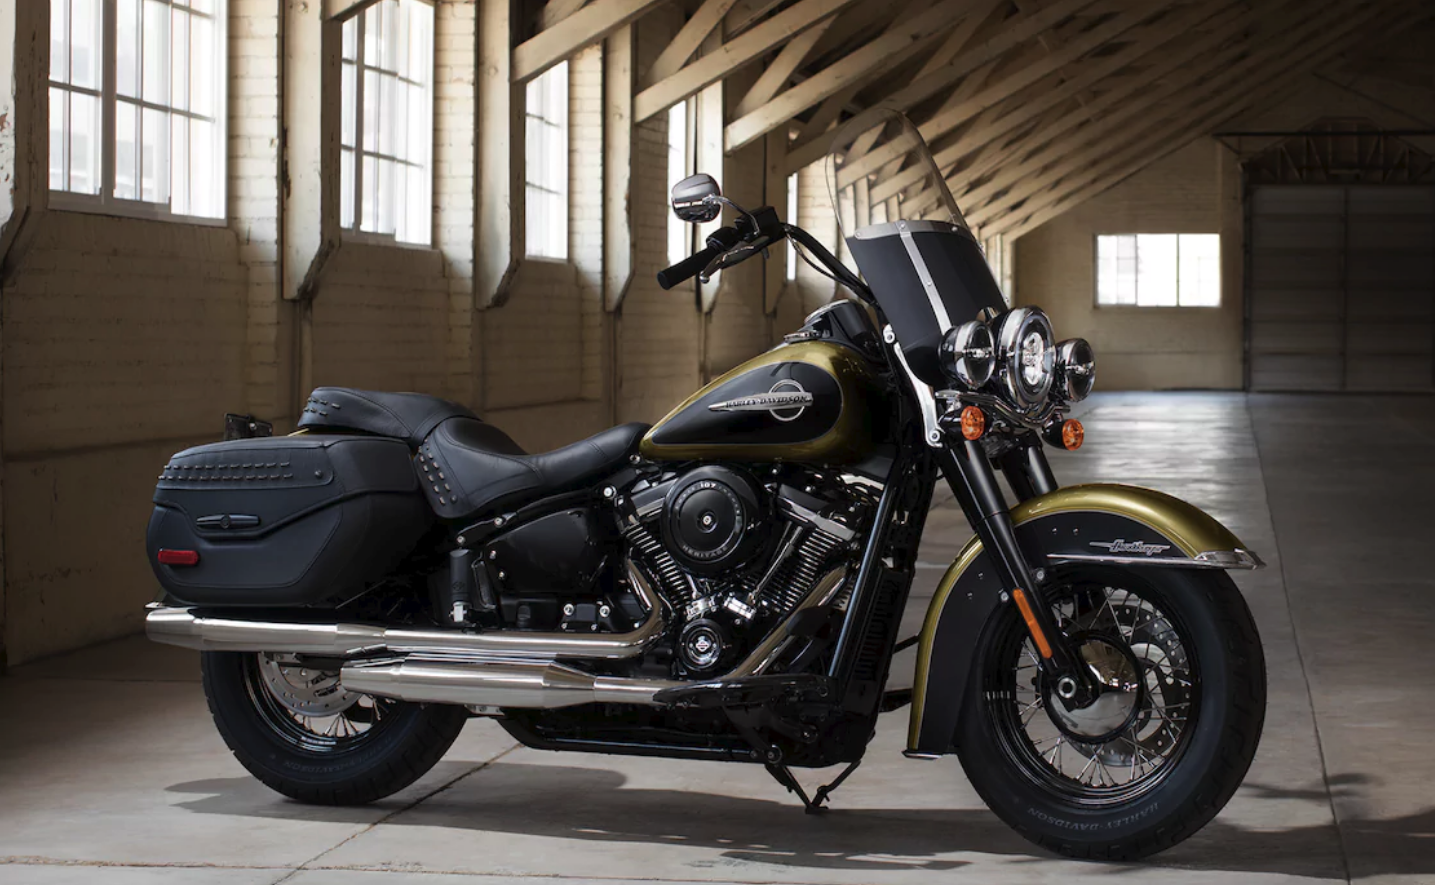 New Harley Davidson For Sale With Upgraded Features You Have To See To Believe